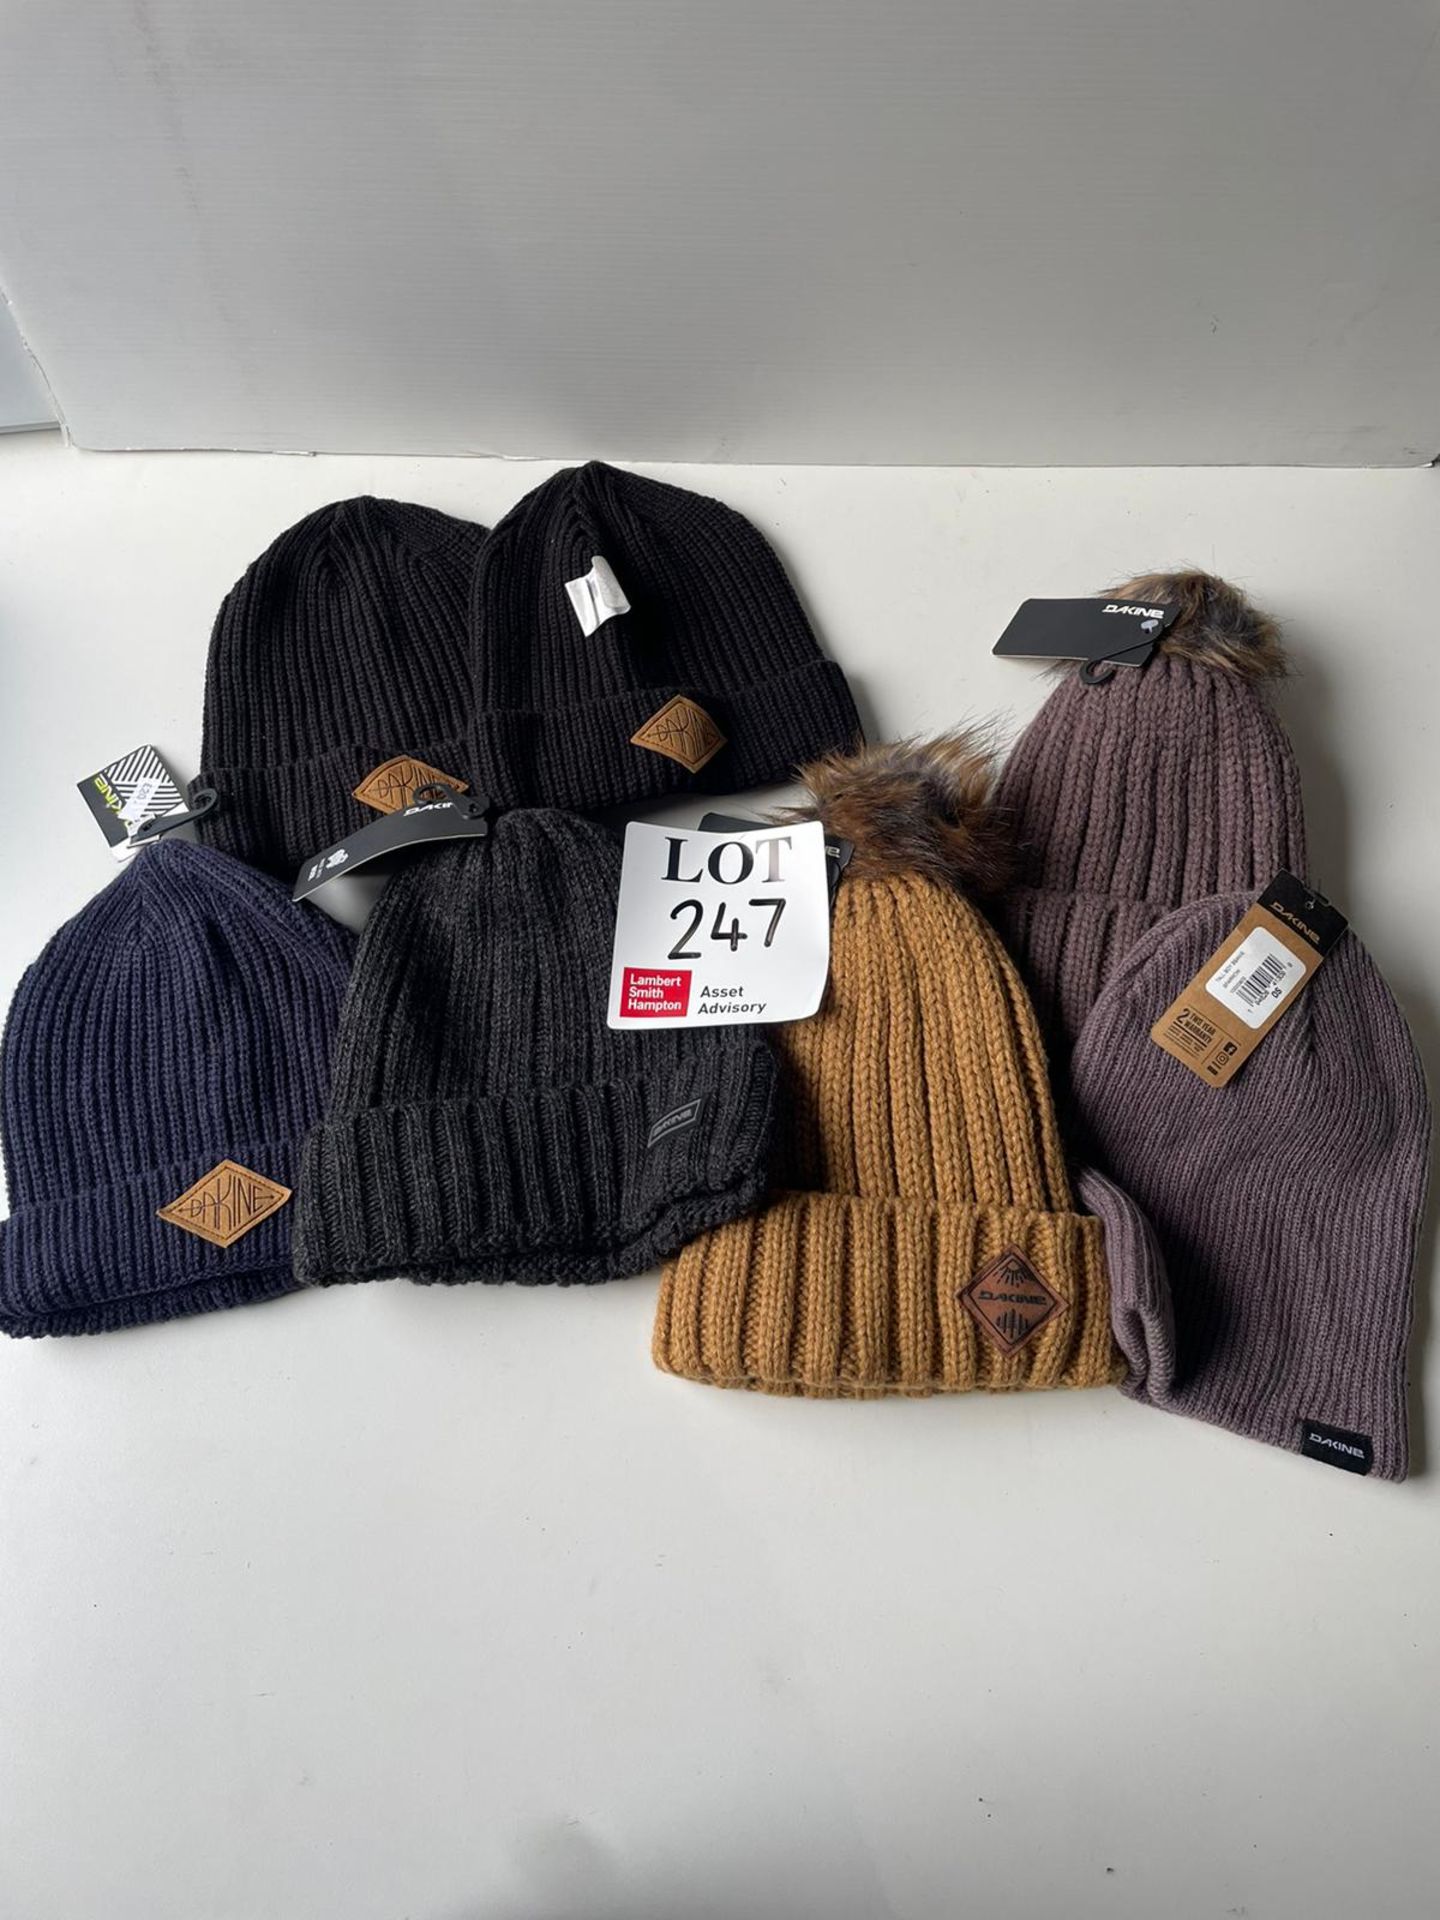 Five Dakine adults beanies and two bobble hats